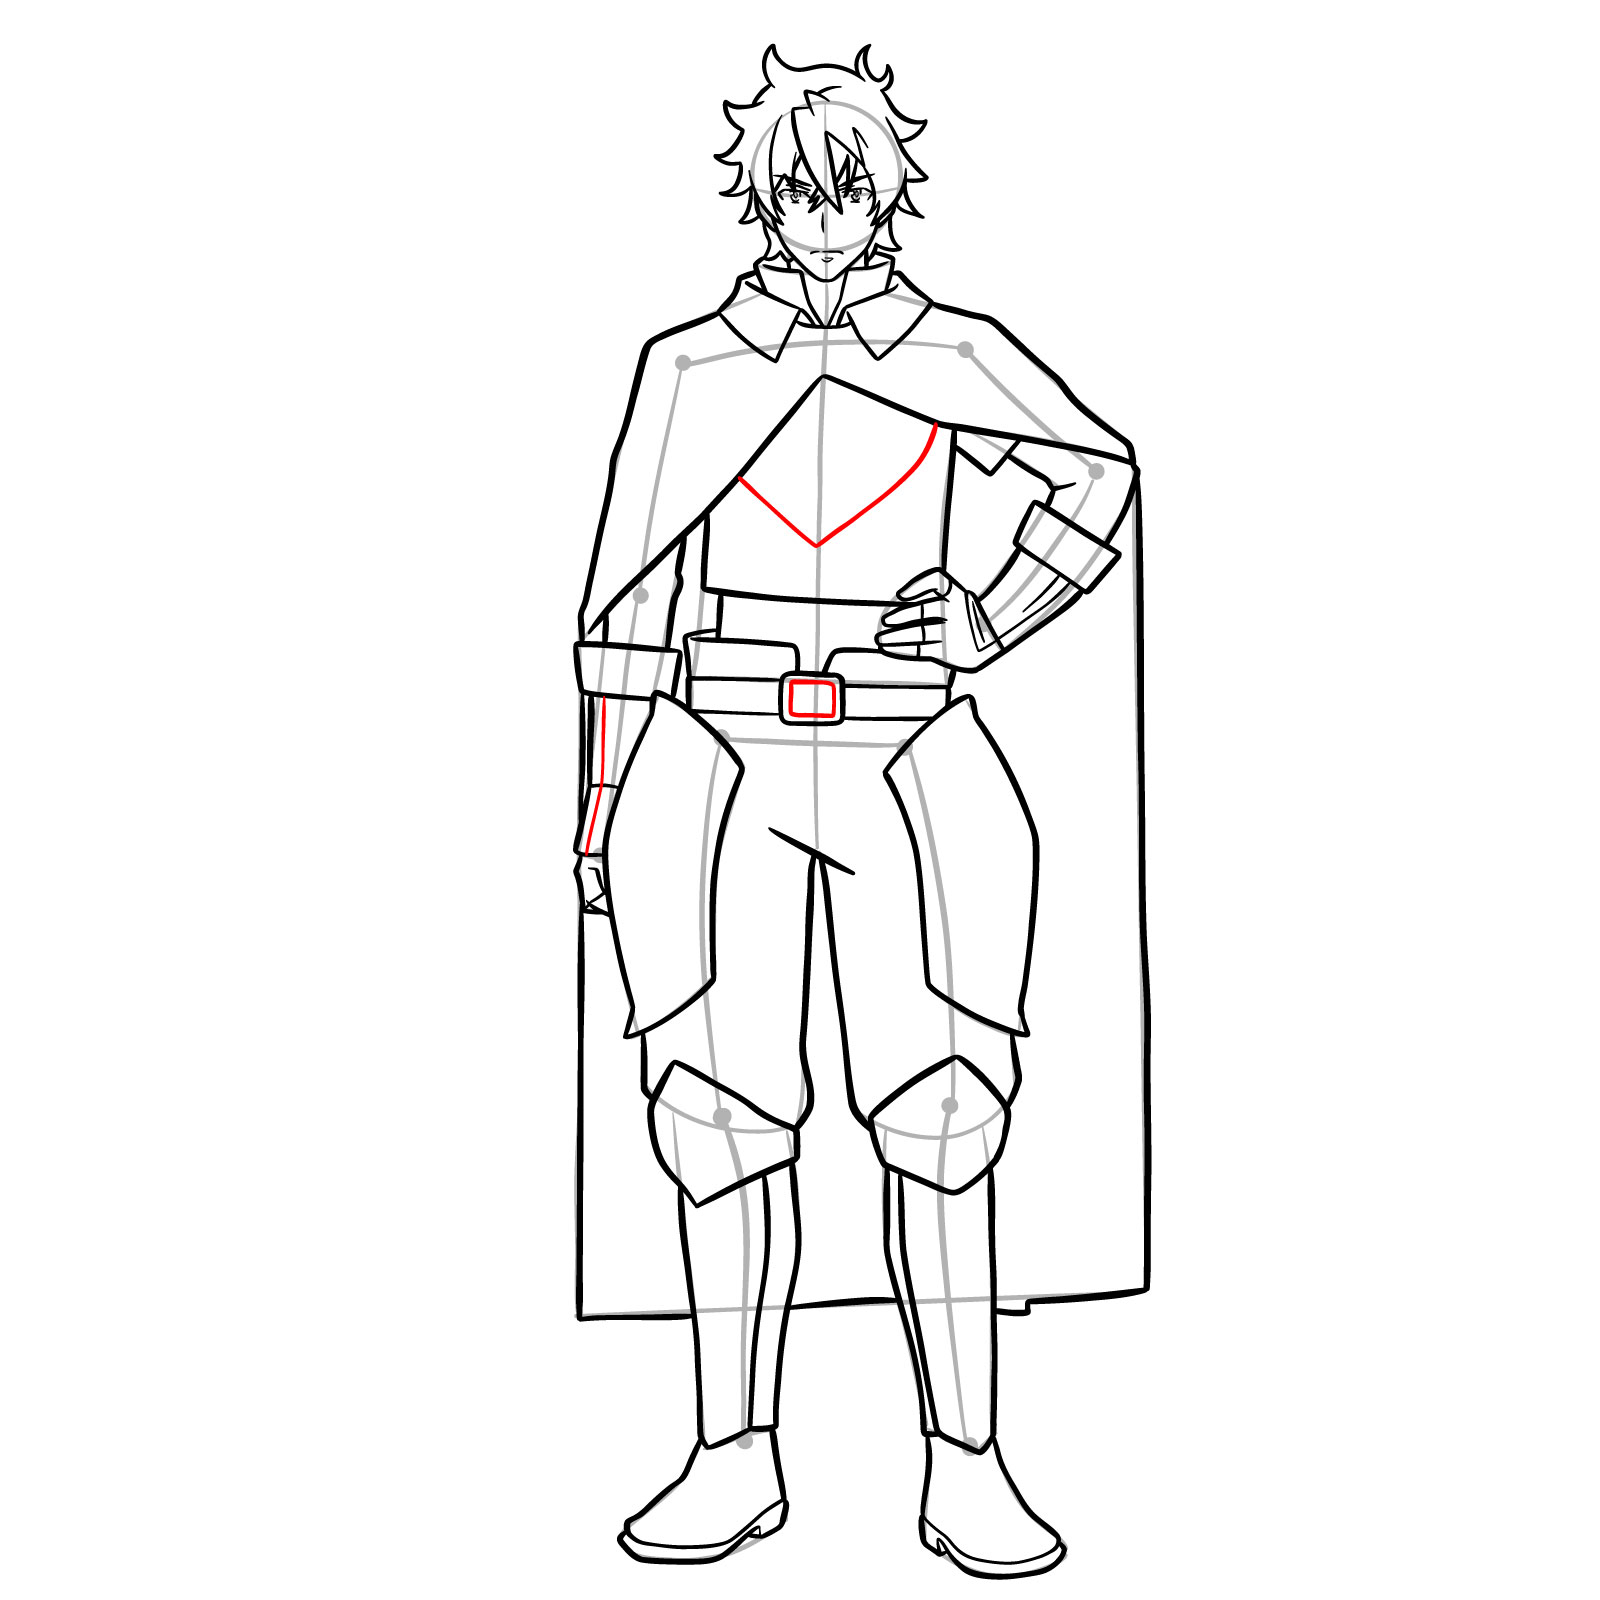 How to draw Naofumi Iwatani from The Rising of the Shield Hero - step 24